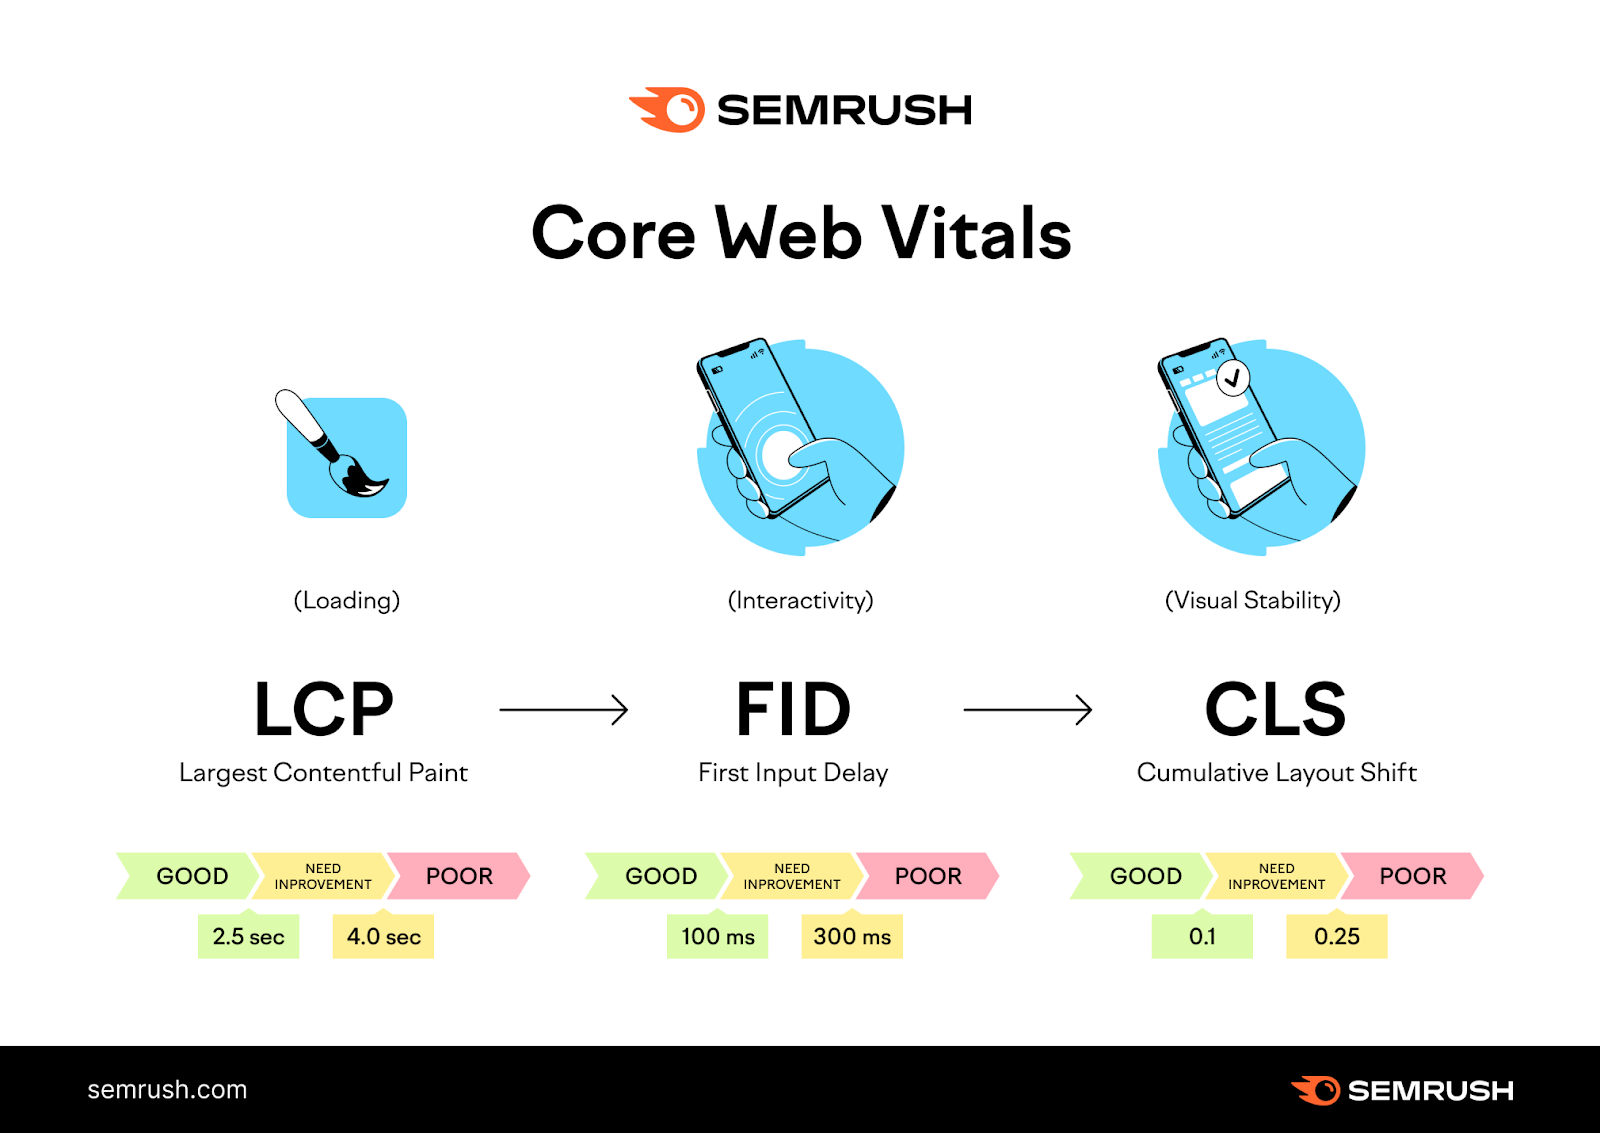 Core Web Vitals infographic, showing how LCP, FID and CLS are measured